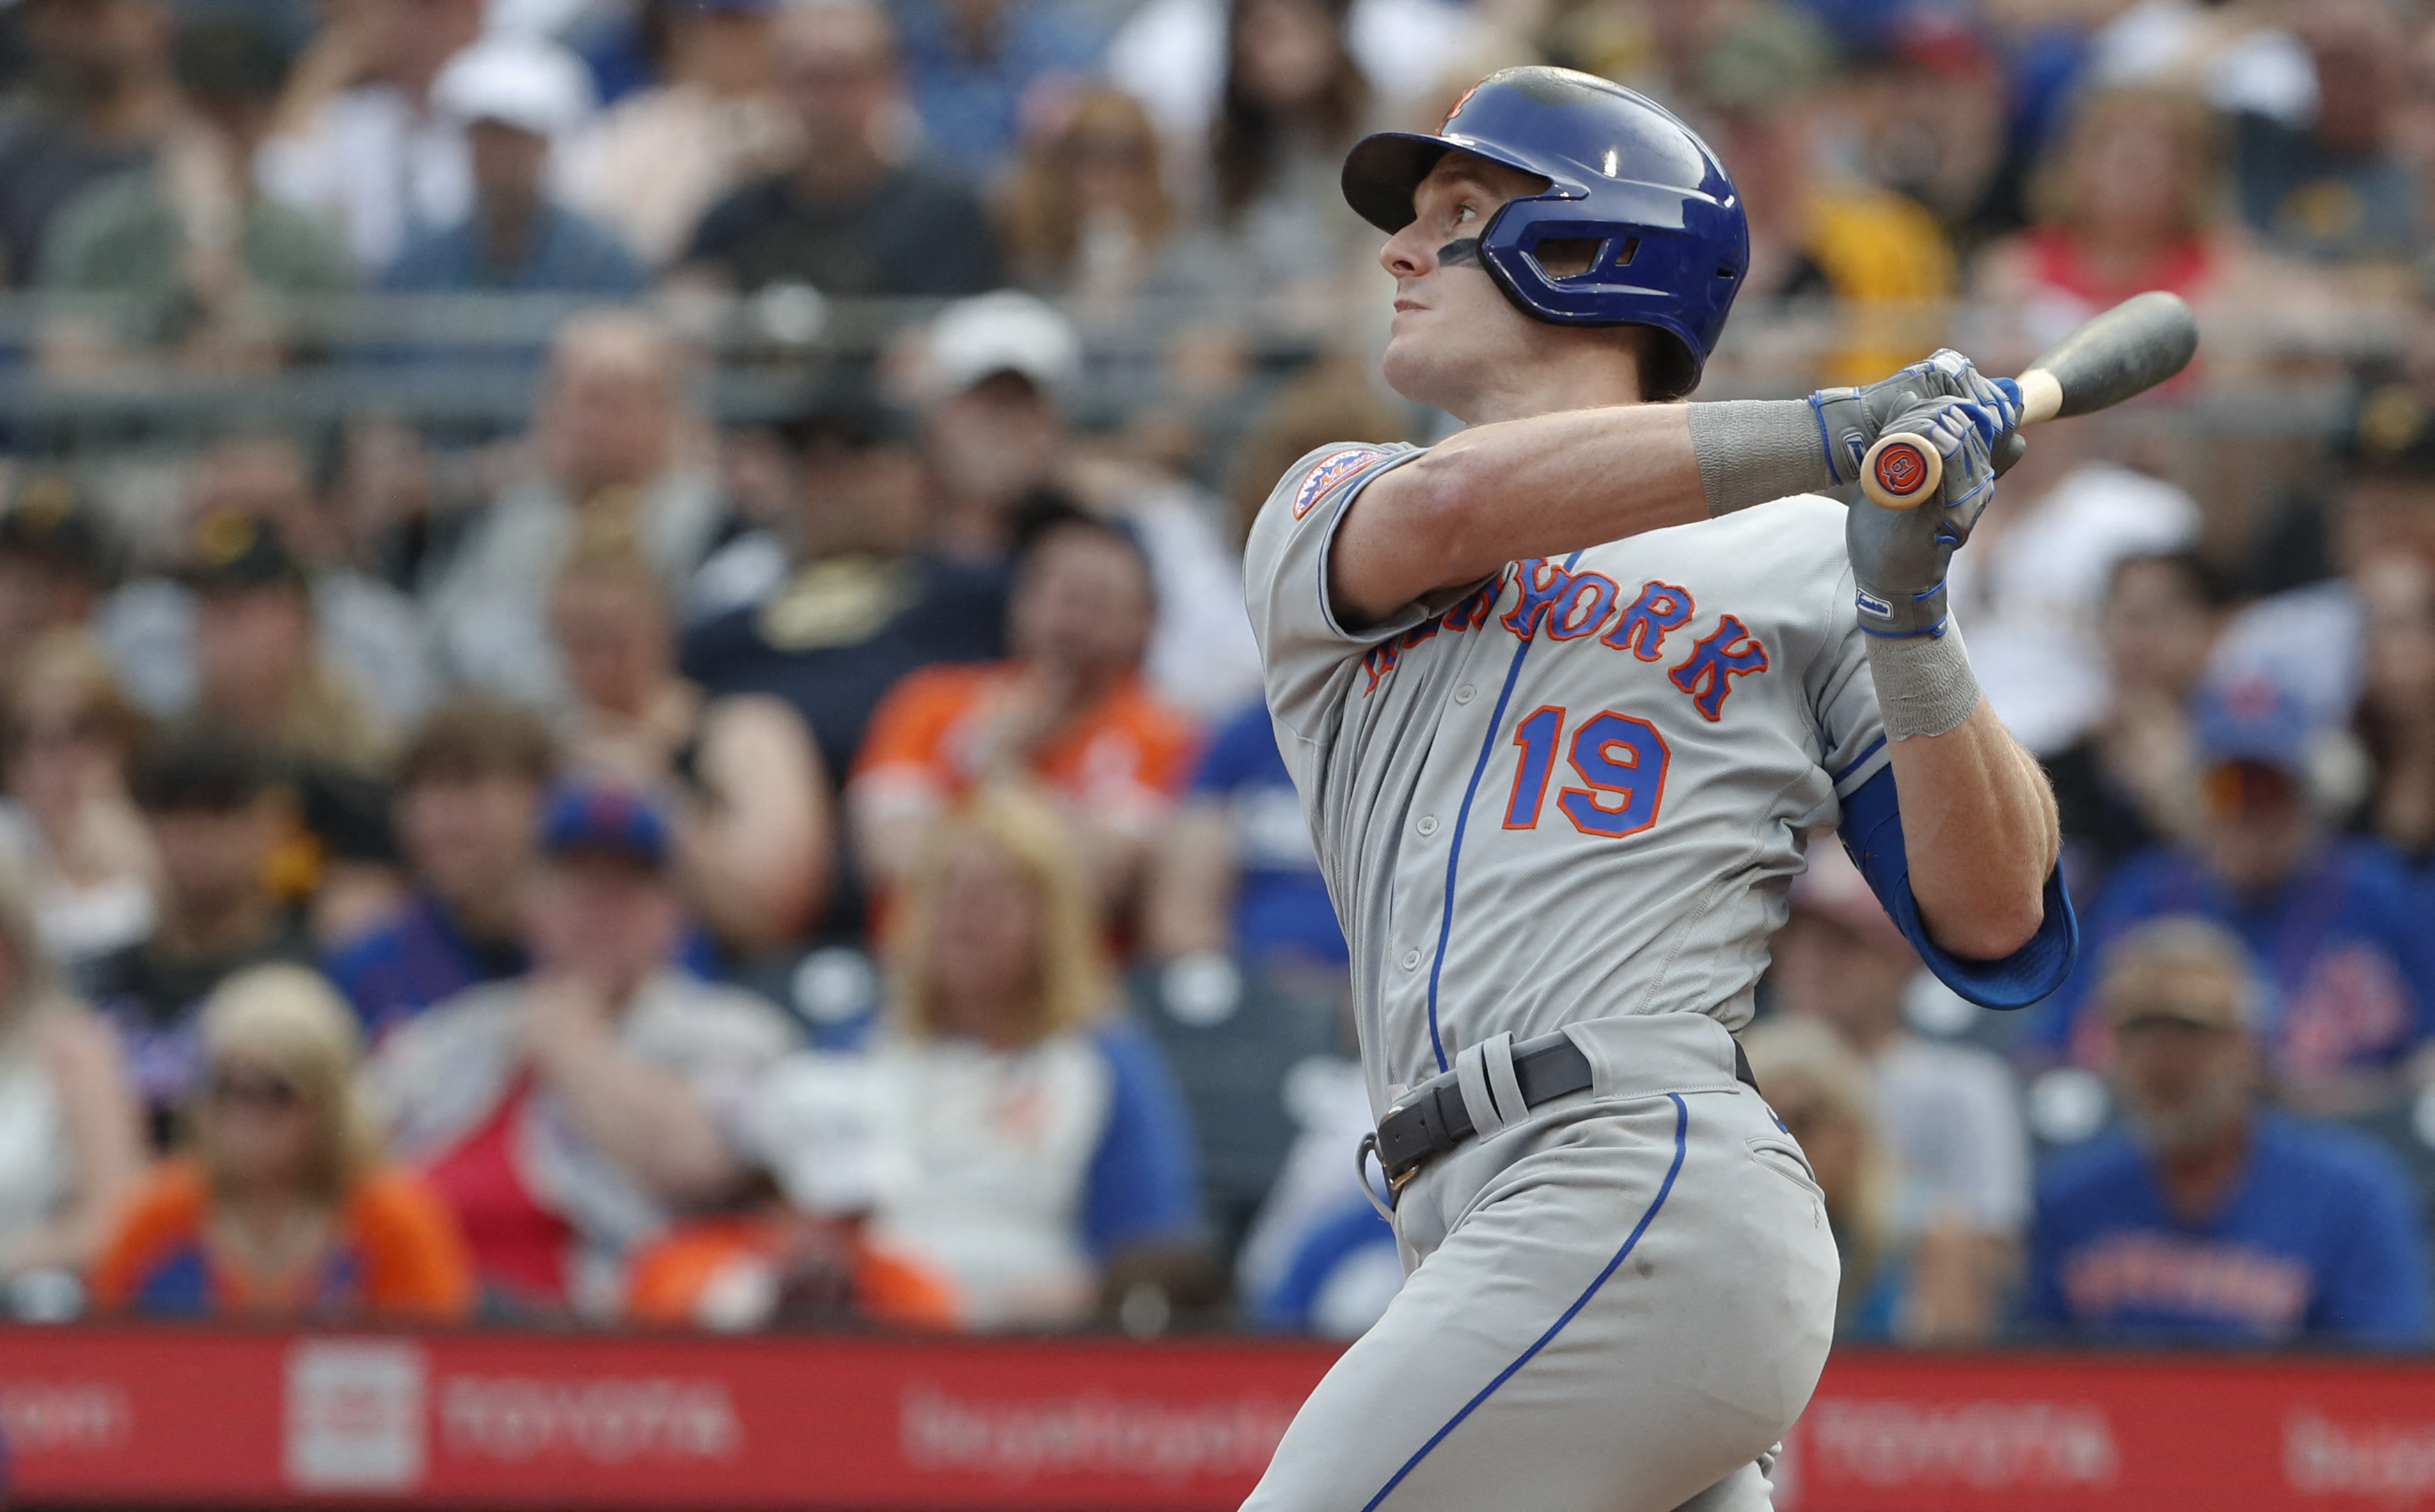 Mets stop 7-game skid, beat Pirates 5-1 behind Canha's 3 RBIs